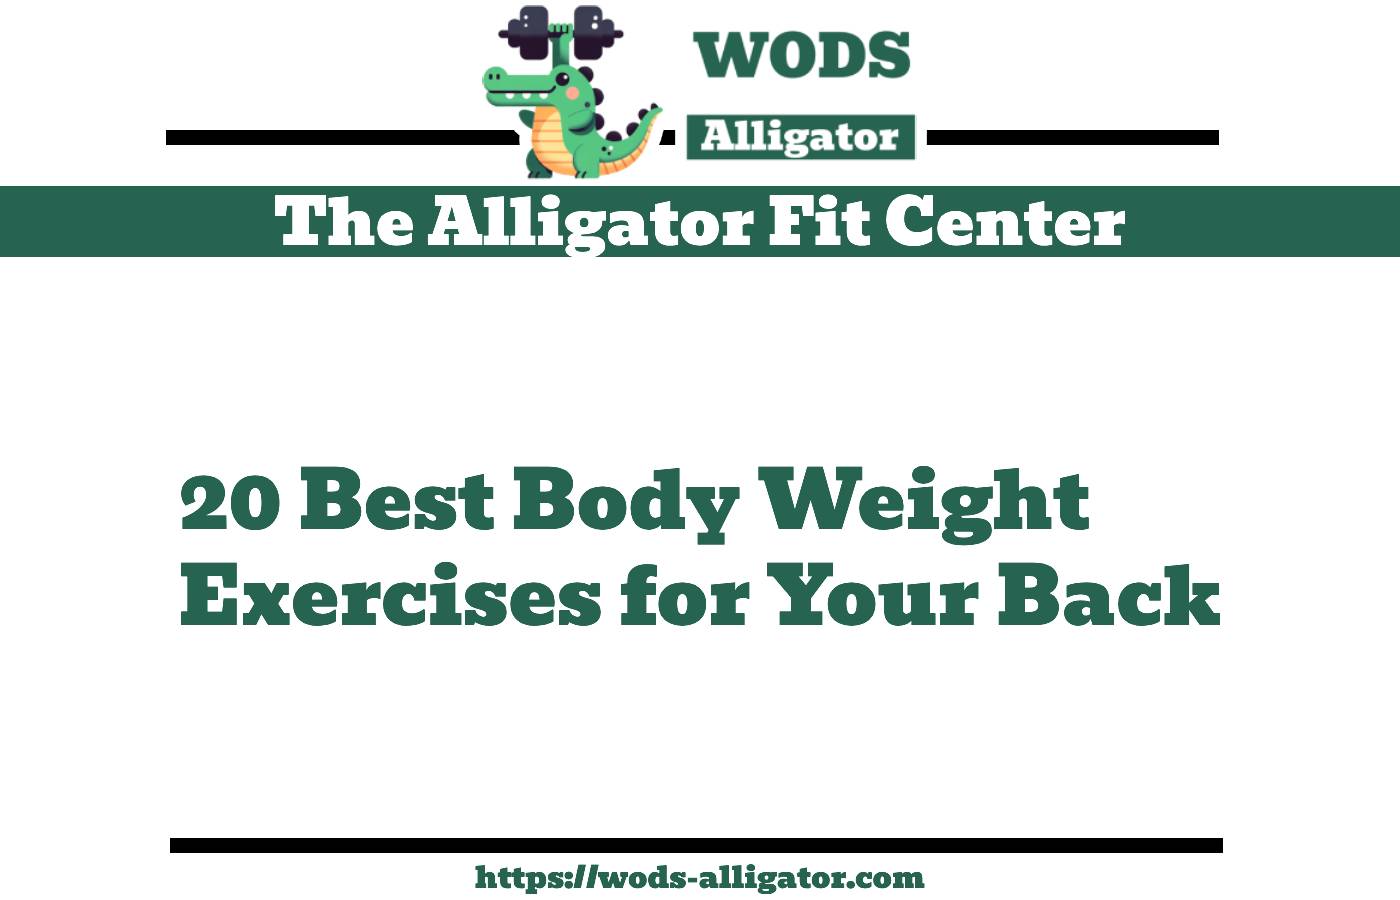 Header - 20 Best Body Weight Exercises for Your Back